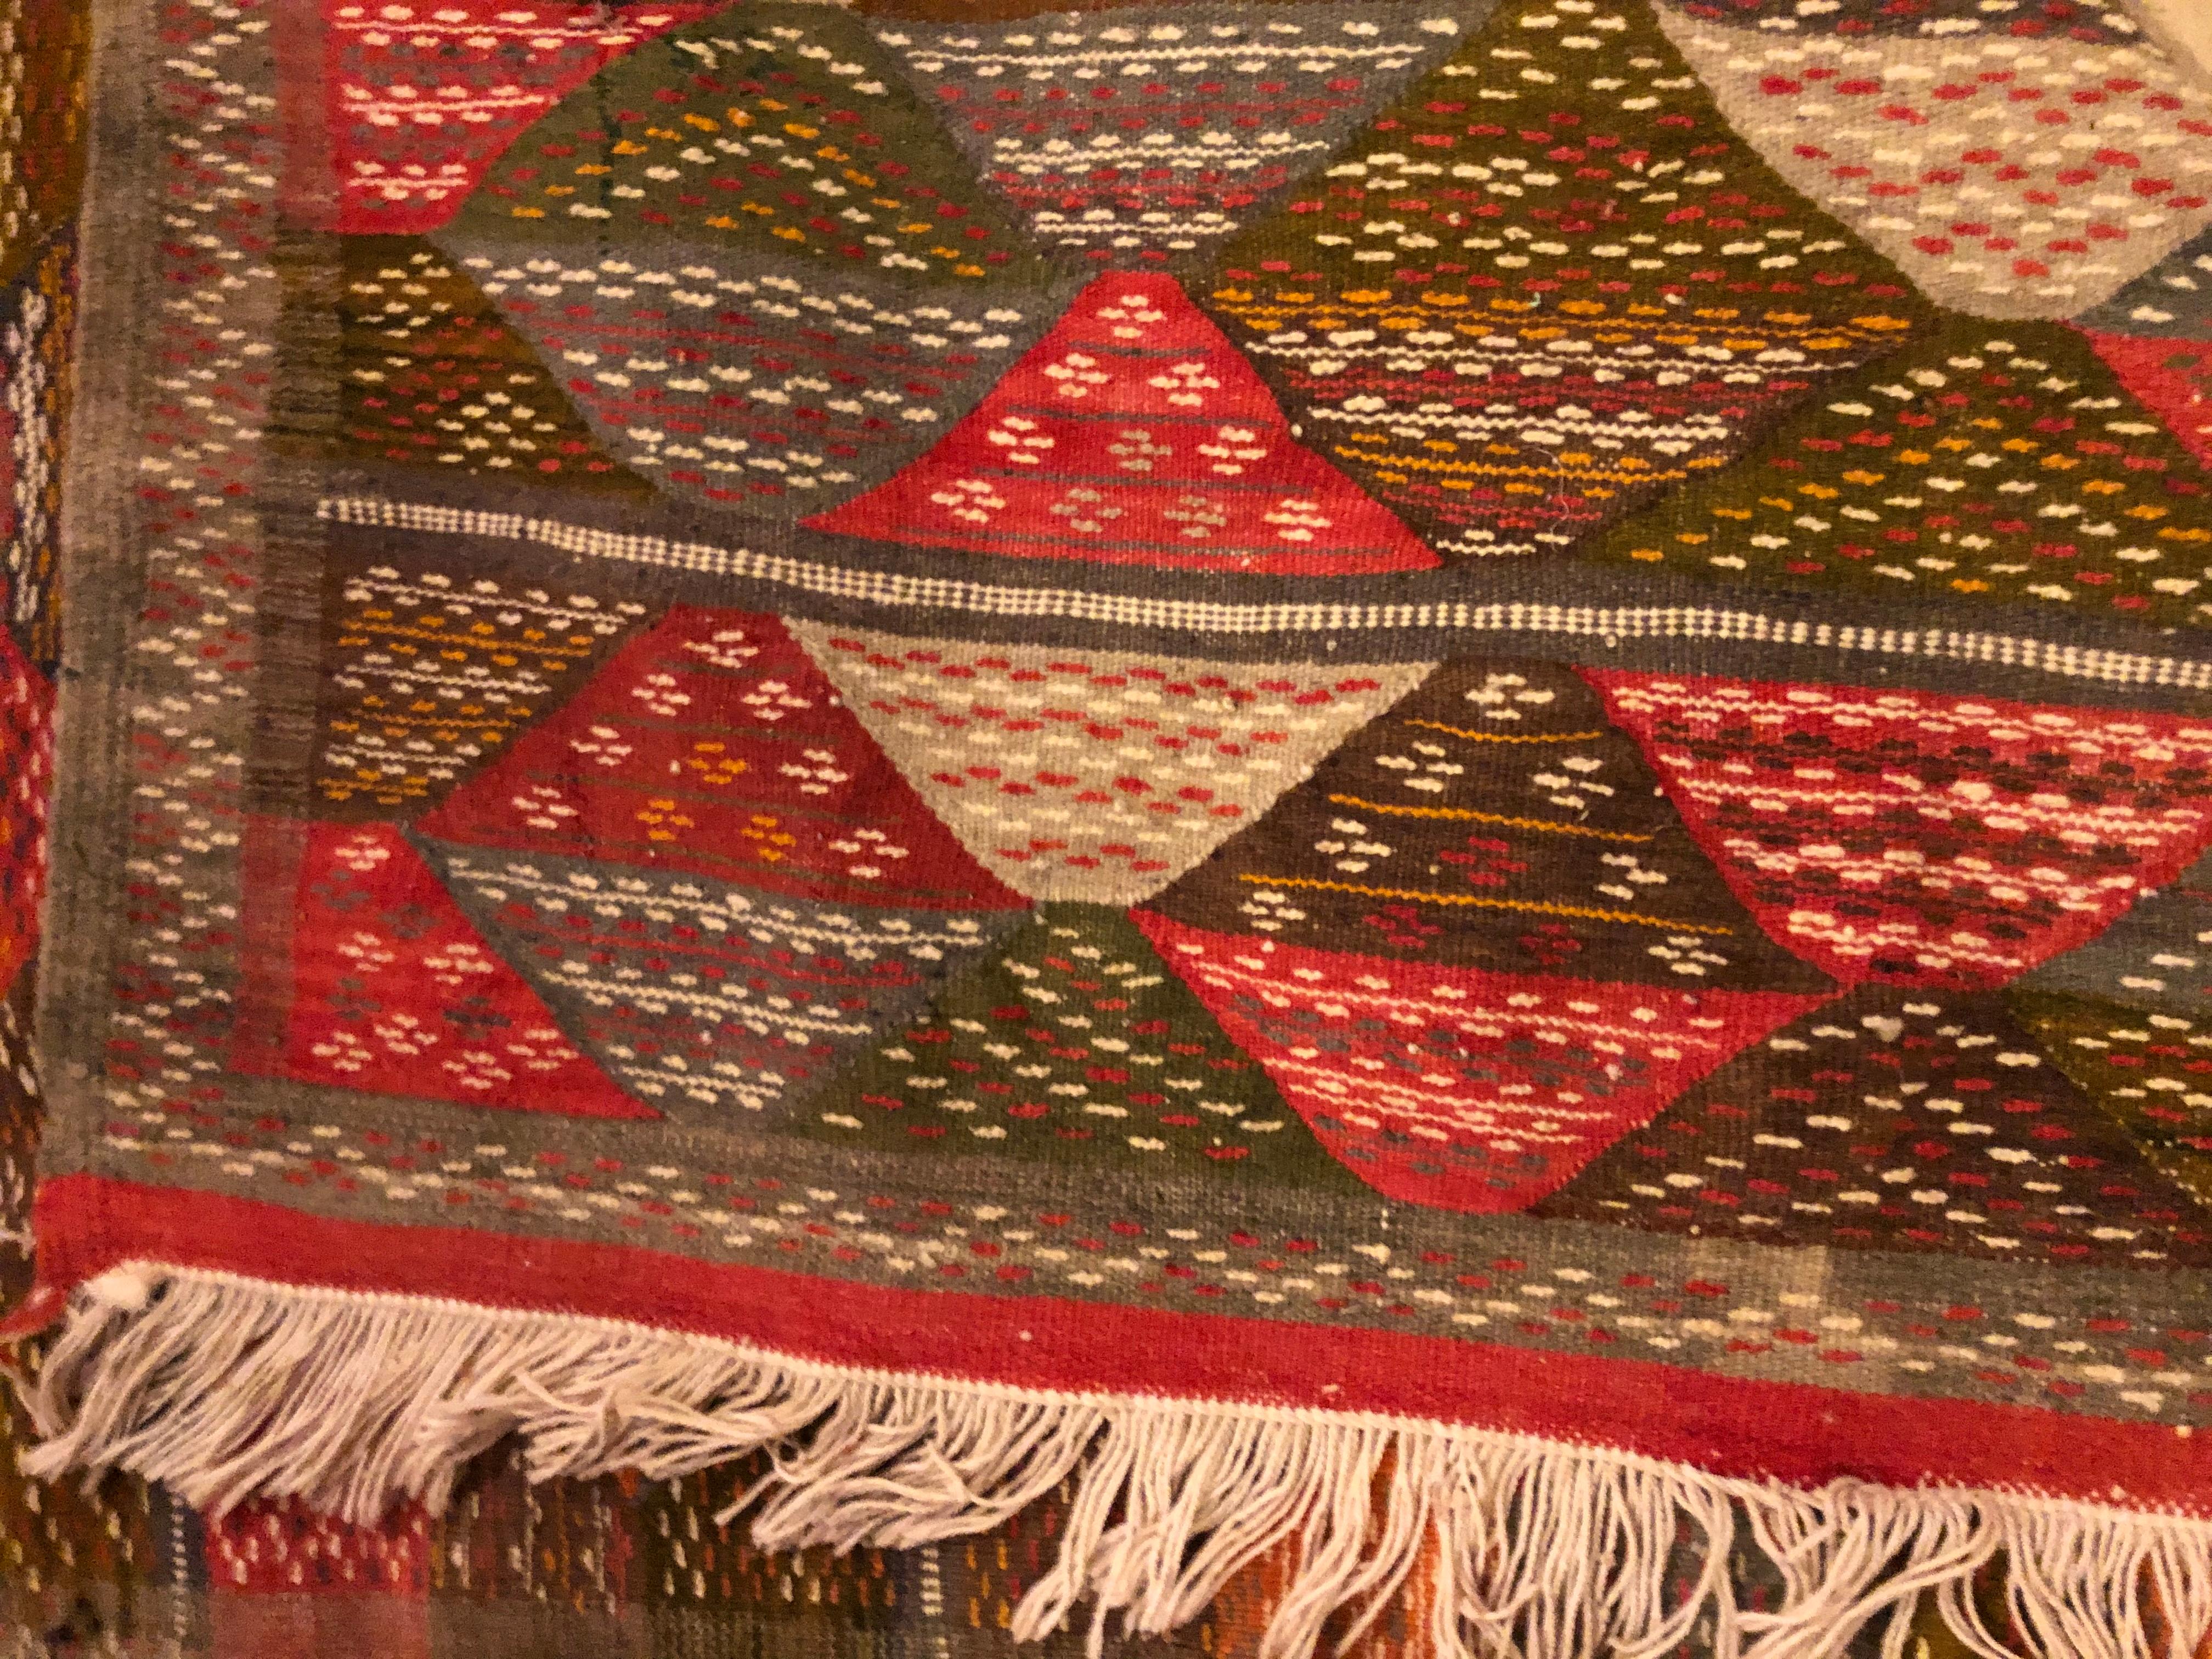 Vintage Tribal Handwoven Wool and Organic Dye Rug or Carpet in Triangle Patterns 3